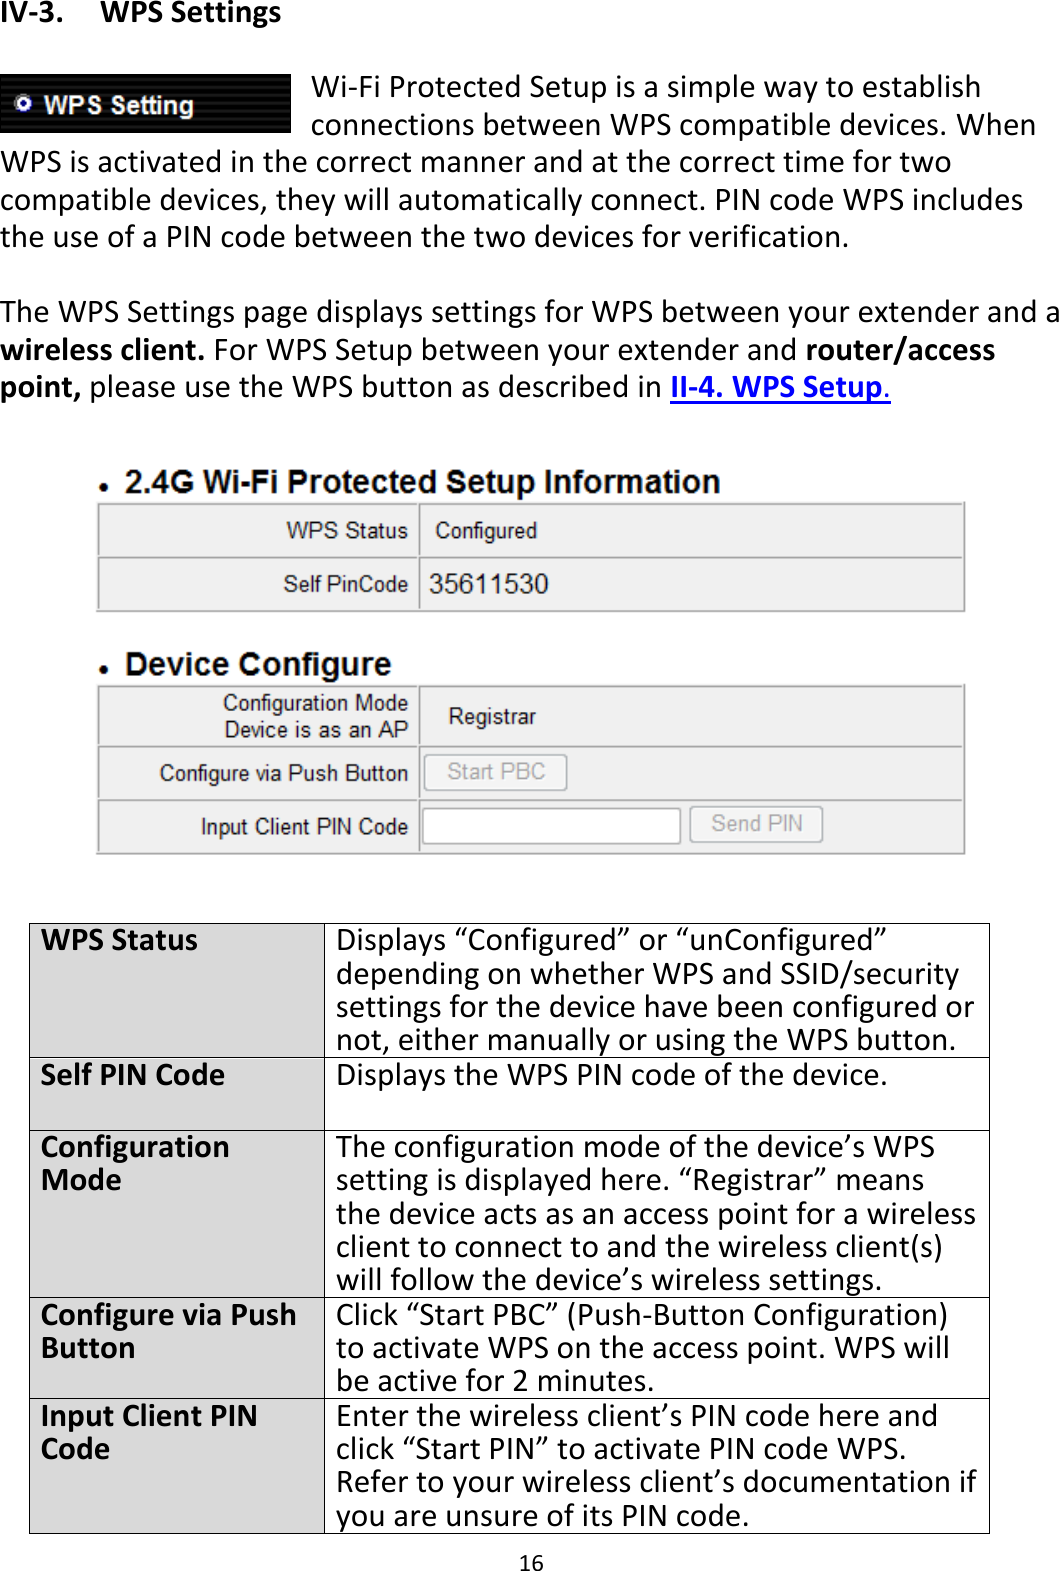 16 IV-3.    WPS Settings  Wi-Fi Protected Setup is a simple way to establish connections between WPS compatible devices. When WPS is activated in the correct manner and at the correct time for two compatible devices, they will automatically connect. PIN code WPS includes the use of a PIN code between the two devices for verification.  The WPS Settings page displays settings for WPS between your extender and a wireless client. For WPS Setup between your extender and router/access point, please use the WPS button as described in II-4. WPS Setup.    WPS Status Displays “Configured” or “unConfigured” depending on whether WPS and SSID/security settings for the device have been configured or not, either manually or using the WPS button. Self PIN Code Displays the WPS PIN code of the device. Configuration Mode The configuration mode of the device’s WPS setting is displayed here. “Registrar” means the device acts as an access point for a wireless client to connect to and the wireless client(s) will follow the device’s wireless settings. Configure via Push Button Click “Start PBC” (Push-Button Configuration) to activate WPS on the access point. WPS will be active for 2 minutes. Input Client PIN Code Enter the wireless client’s PIN code here and click “Start PIN” to activate PIN code WPS. Refer to your wireless client’s documentation if you are unsure of its PIN code. 